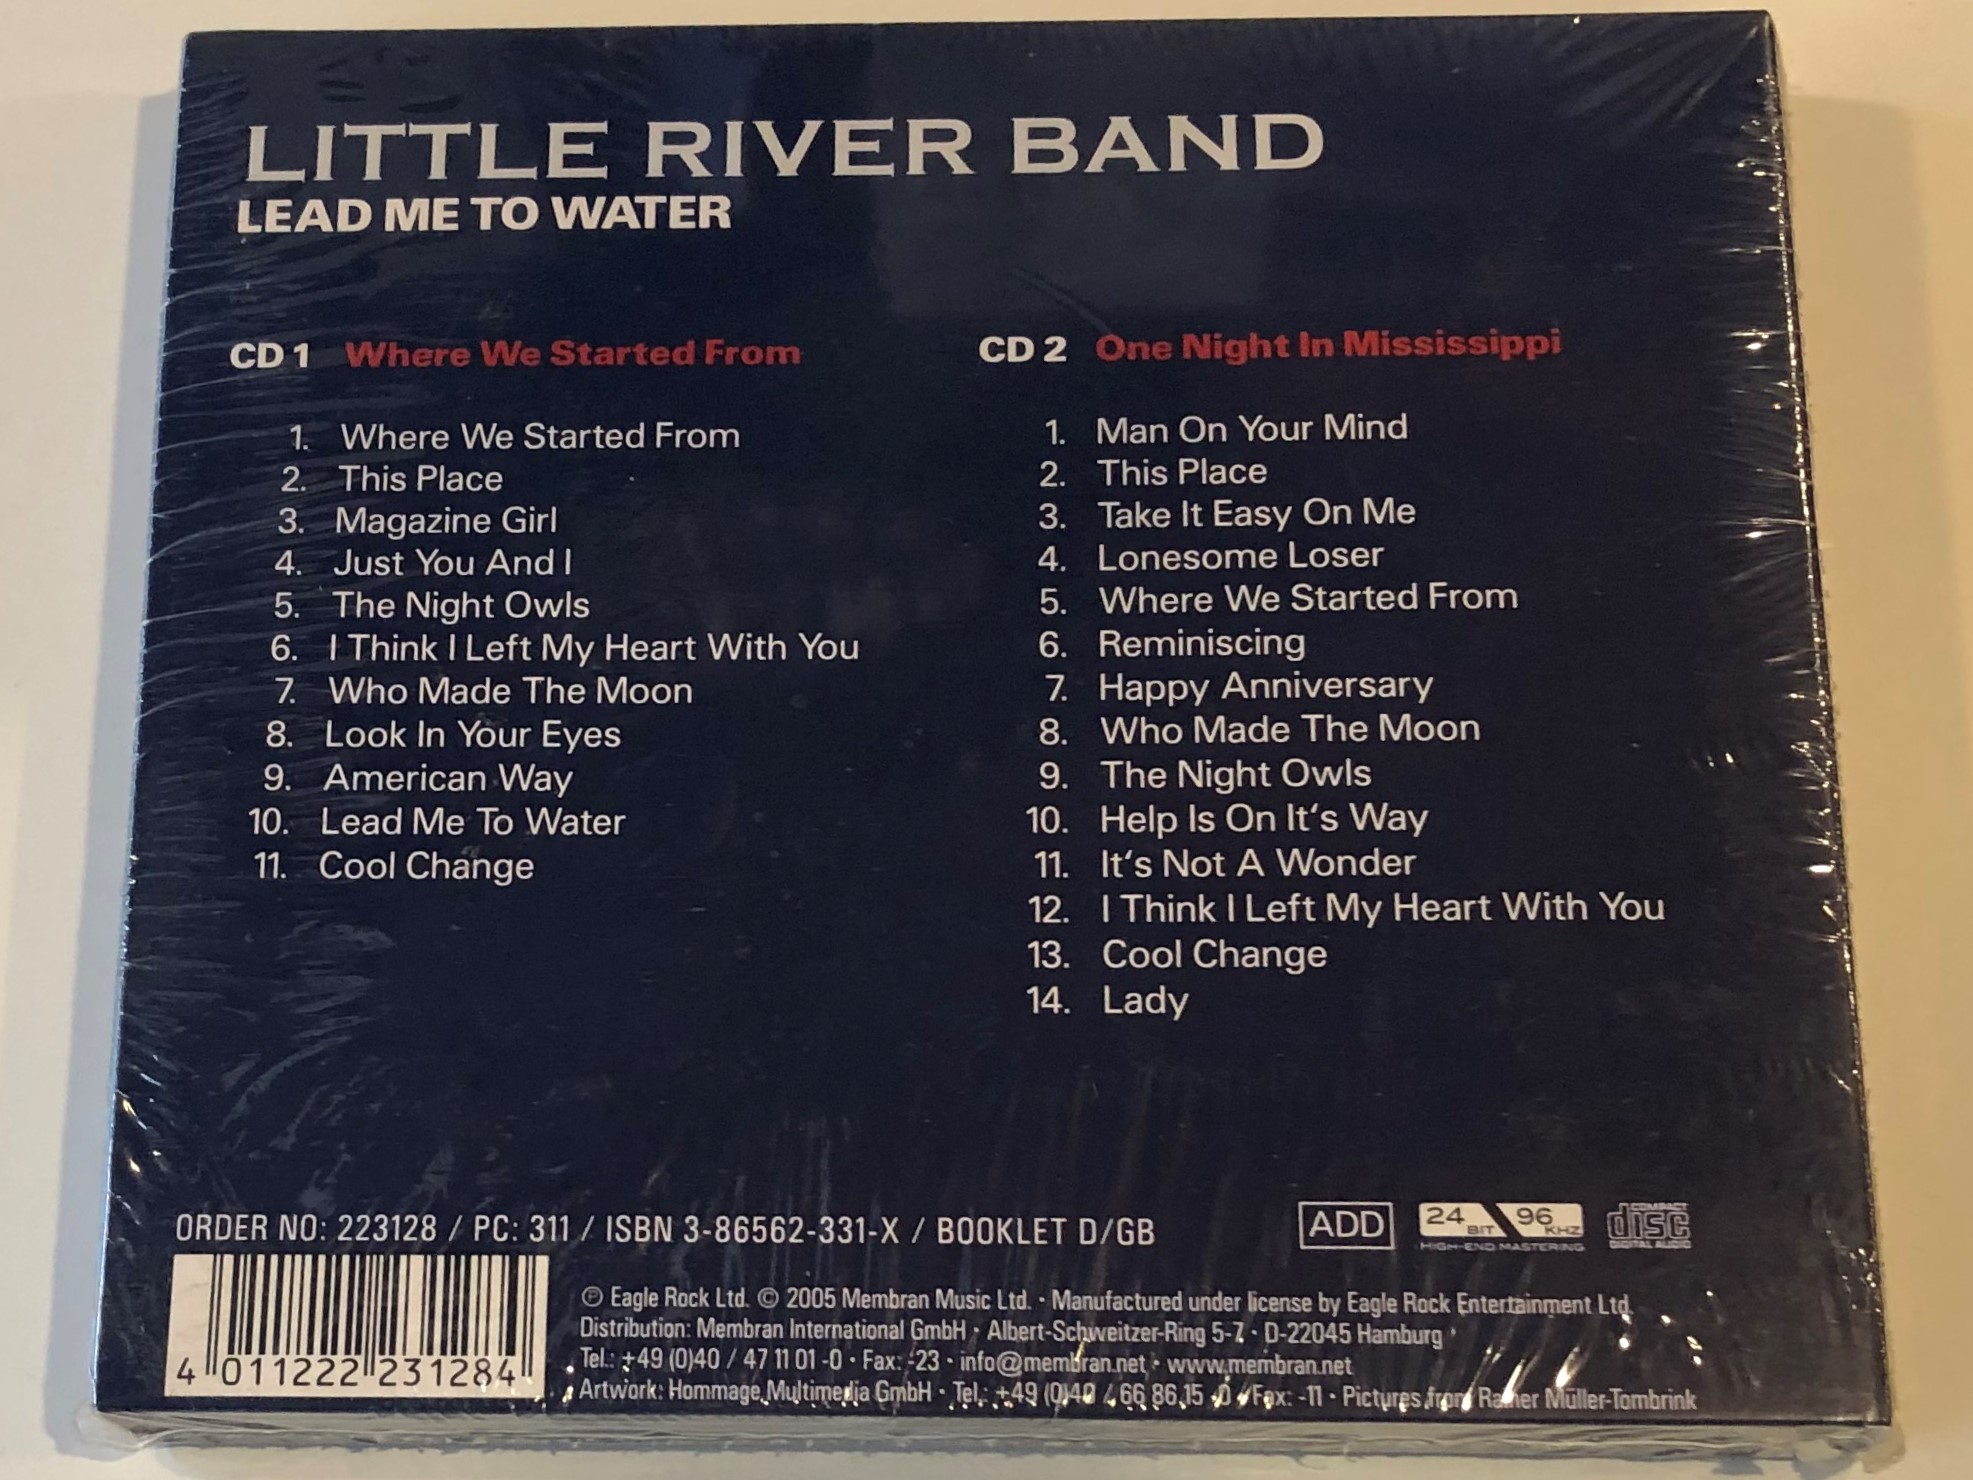 little-river-band-lead-me-to-water-ambitions-2x-audio-cd-set-223128-311-2-.jpg